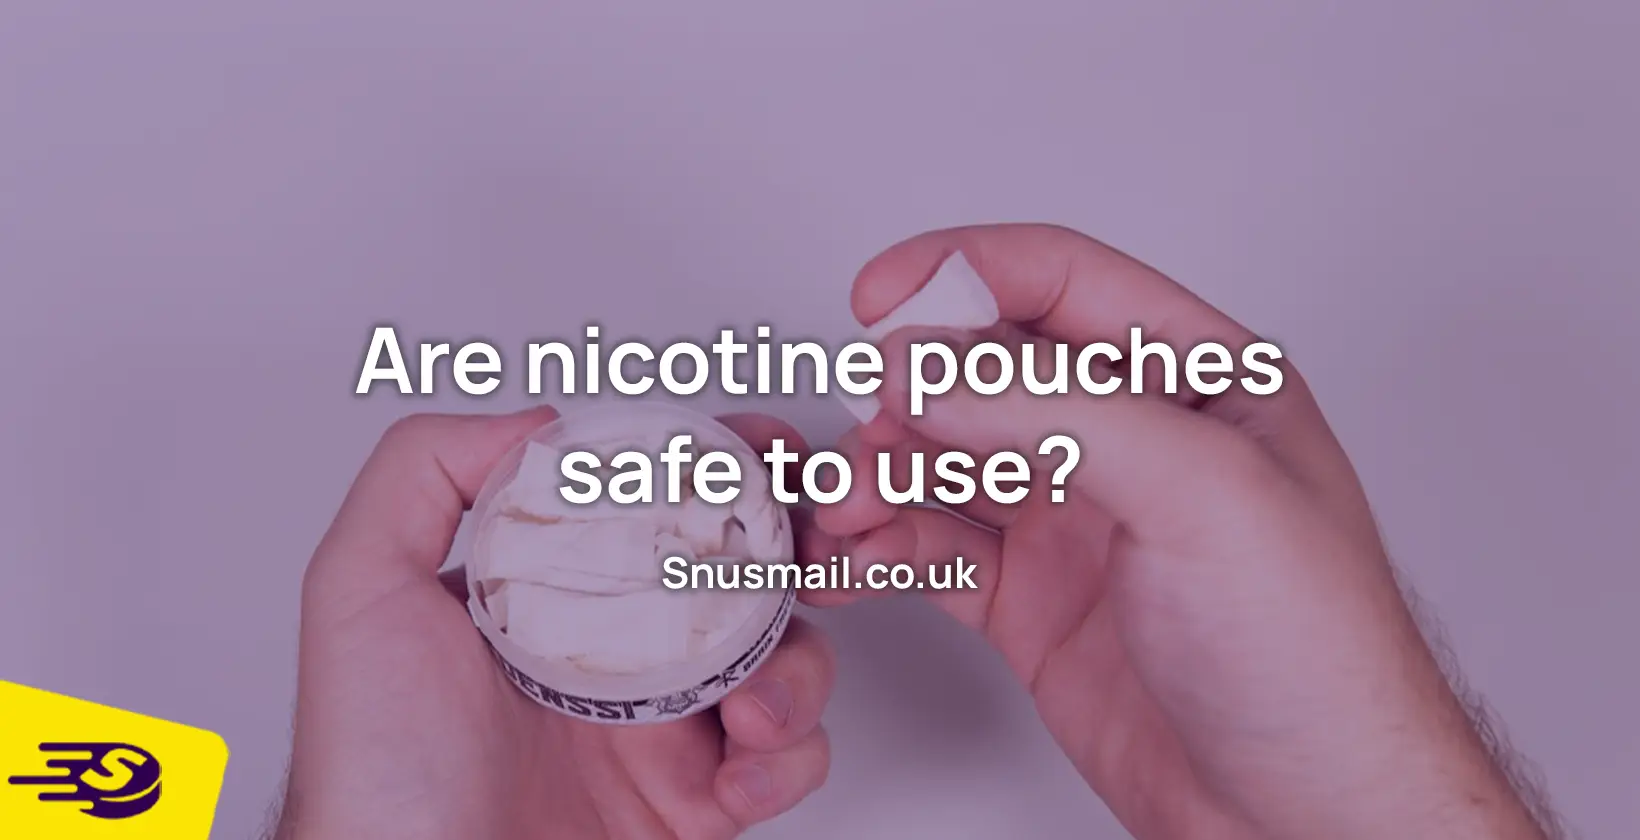 Are nicotine pouches safe to use?